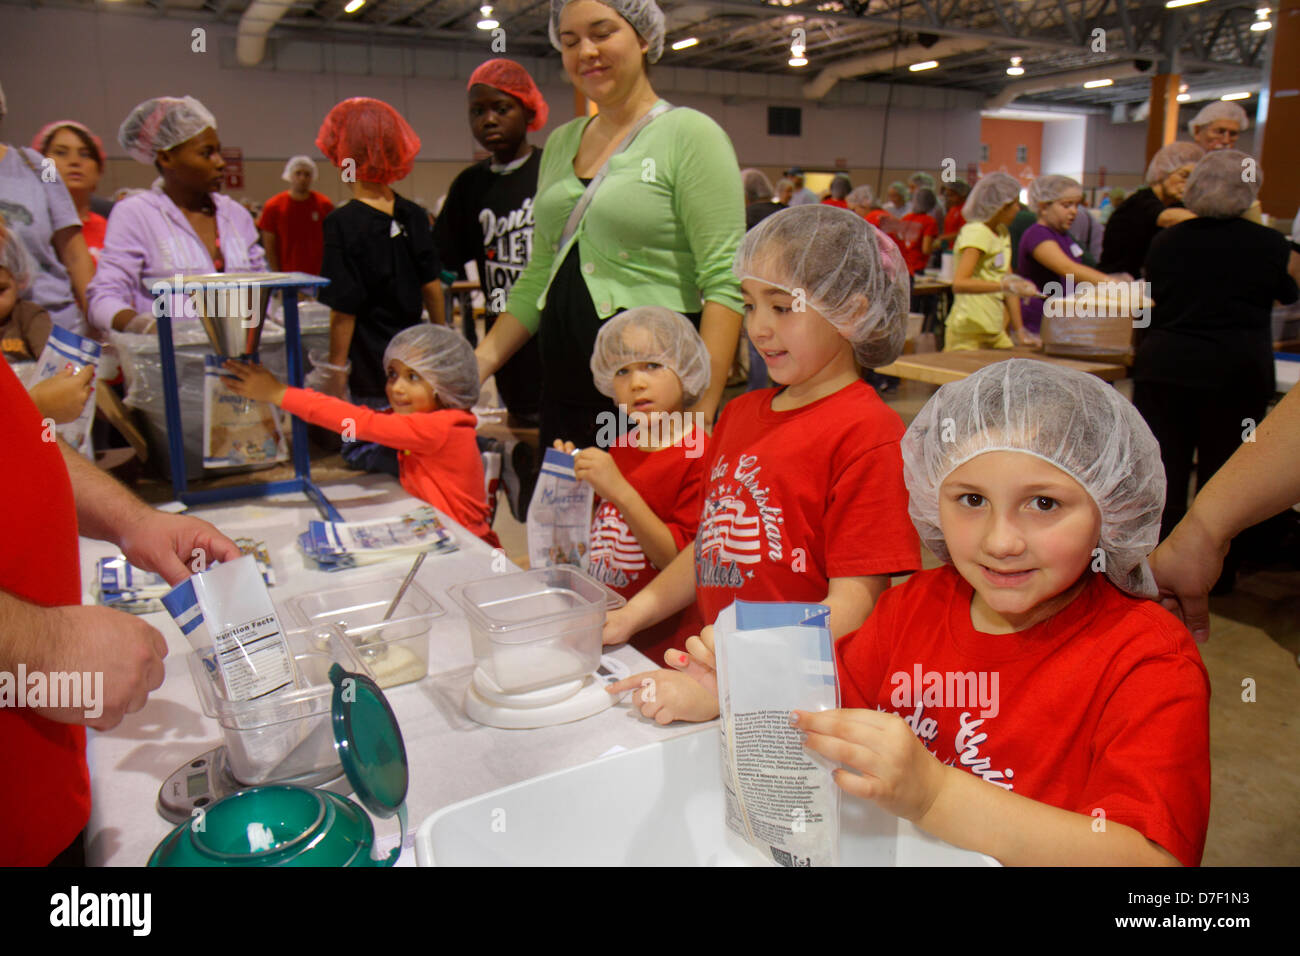 Miami Florida,Miami Dade County Fair And Expo,Feed My Starving Children,volunteer volunteers community service volunteering work worker workers,teamwo Stock Photo